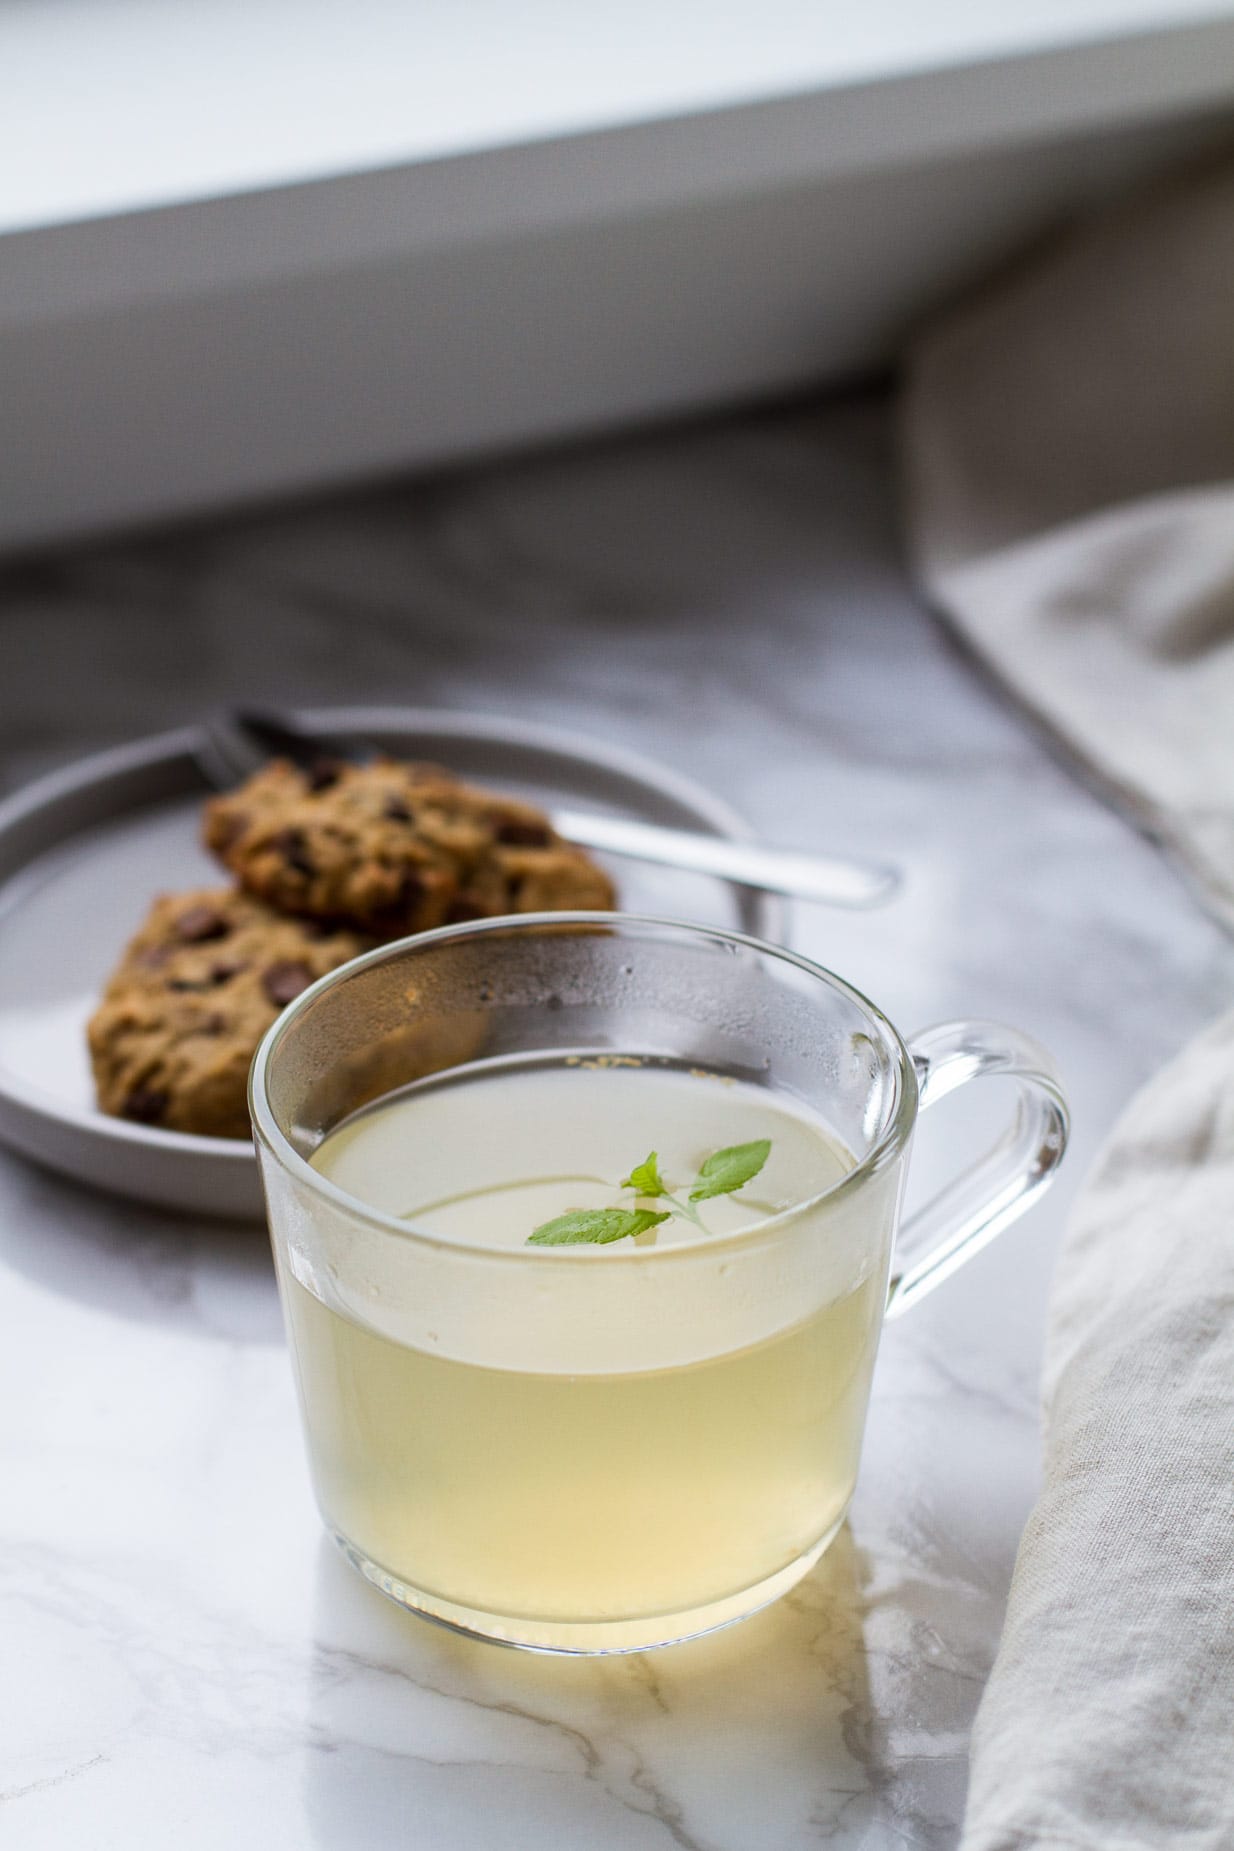 Clear mug with pale yellow drink and lemon verbena garnish. Cookies in the background.